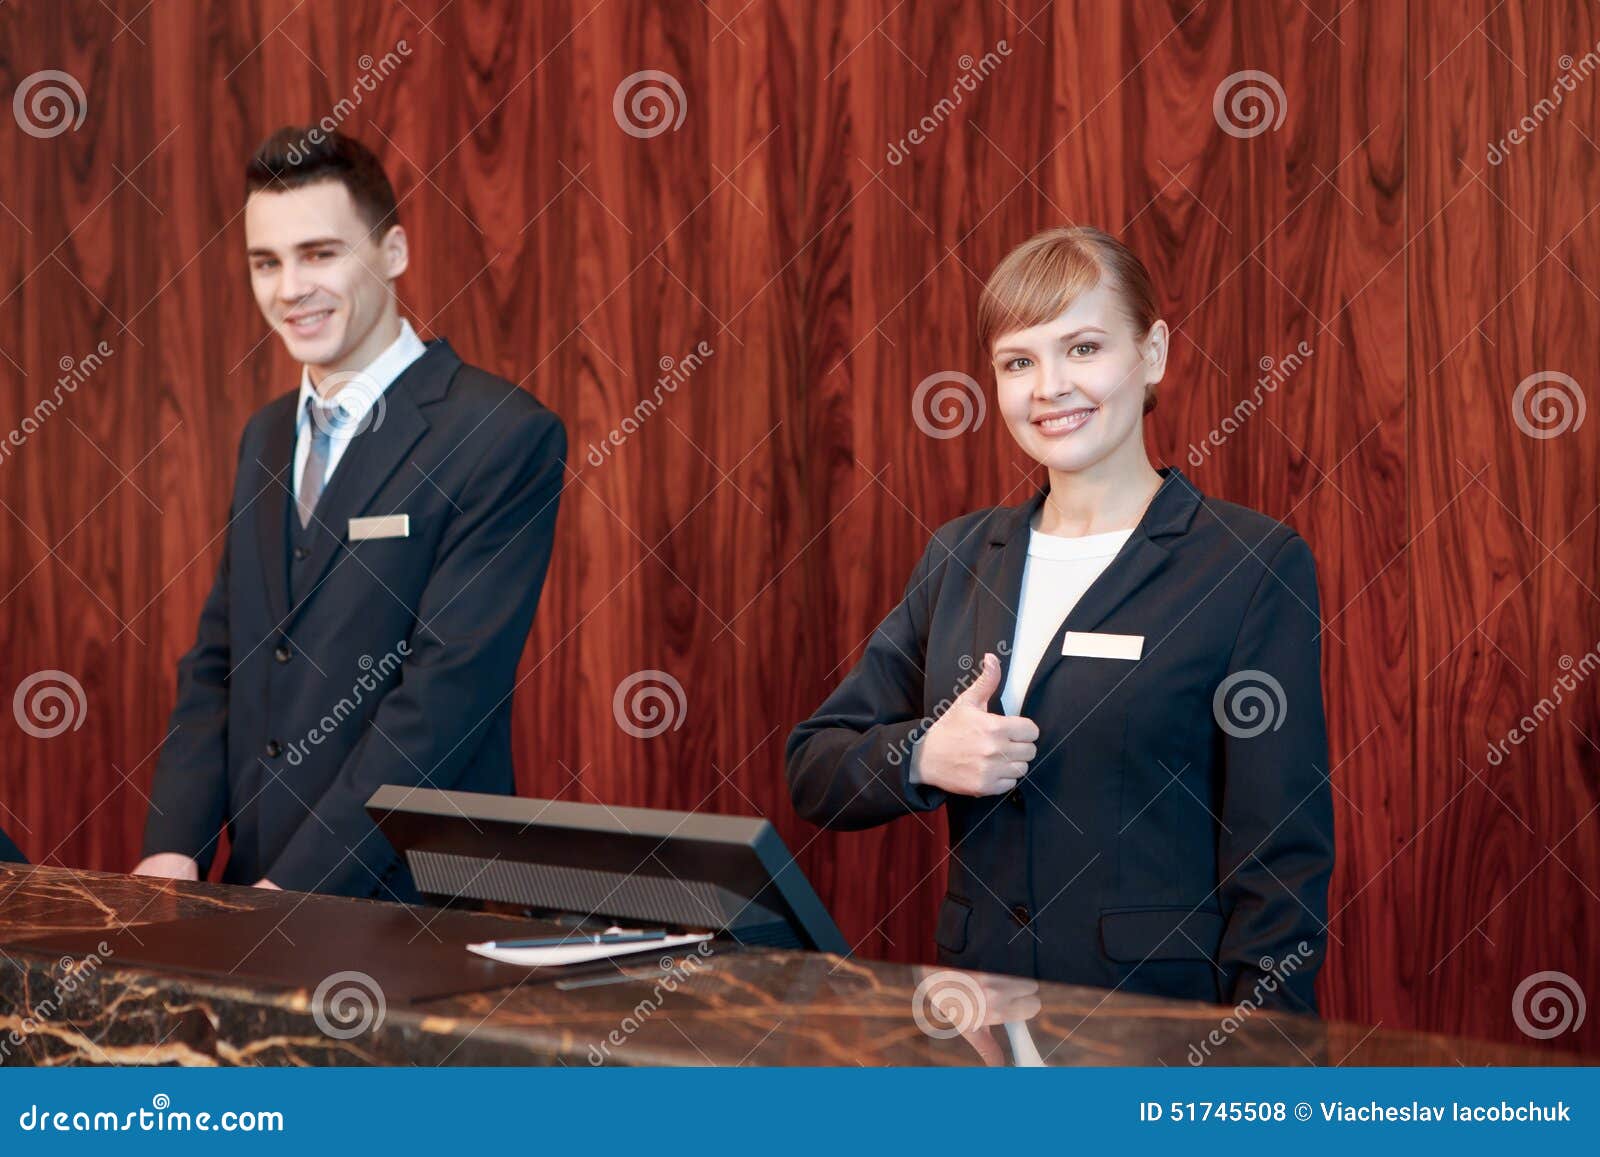 what makes a good hotel receptionist